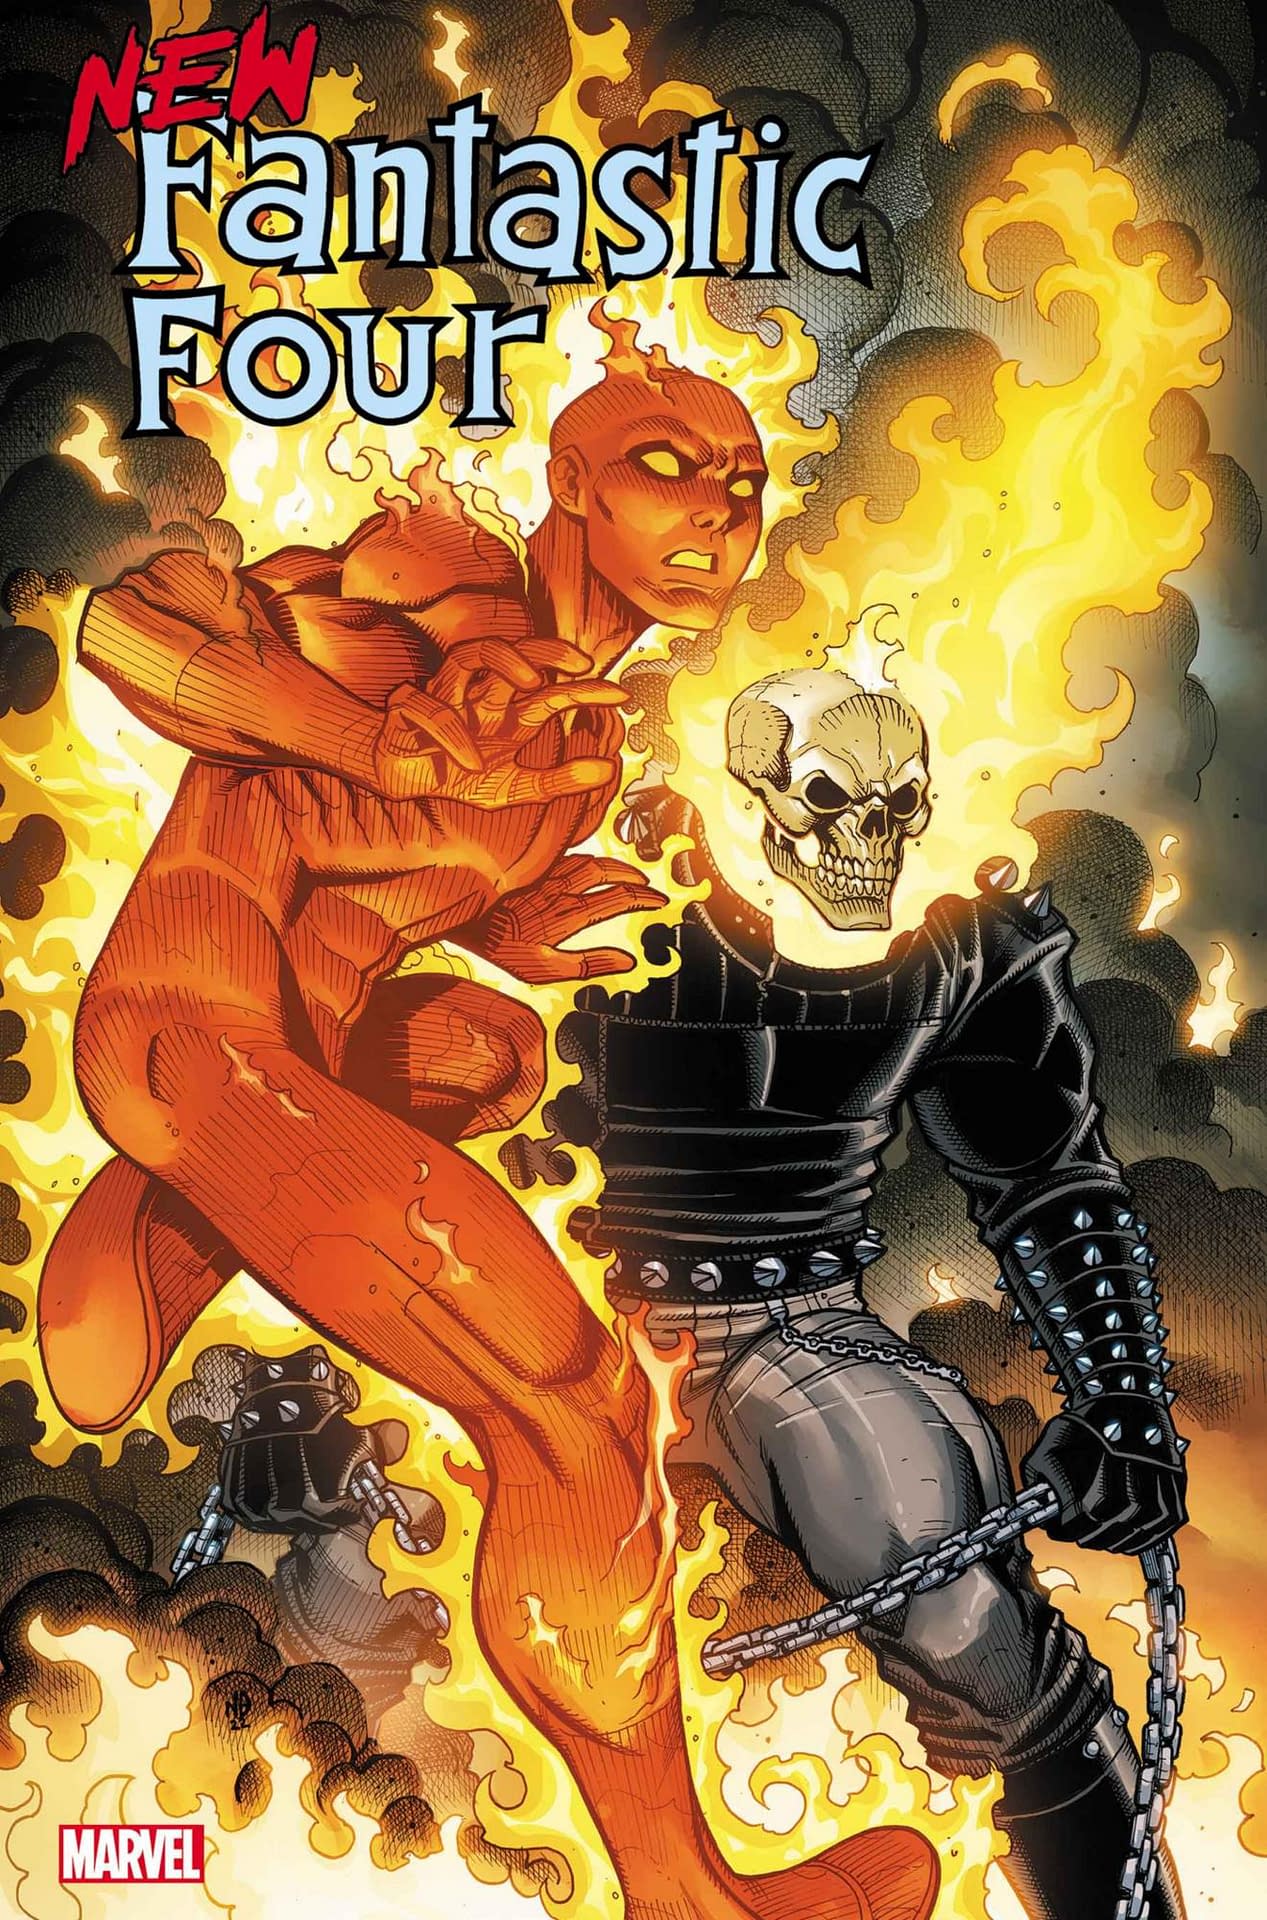 New Fantastic Four #2 Preview: The Secrets of Ghost Rider